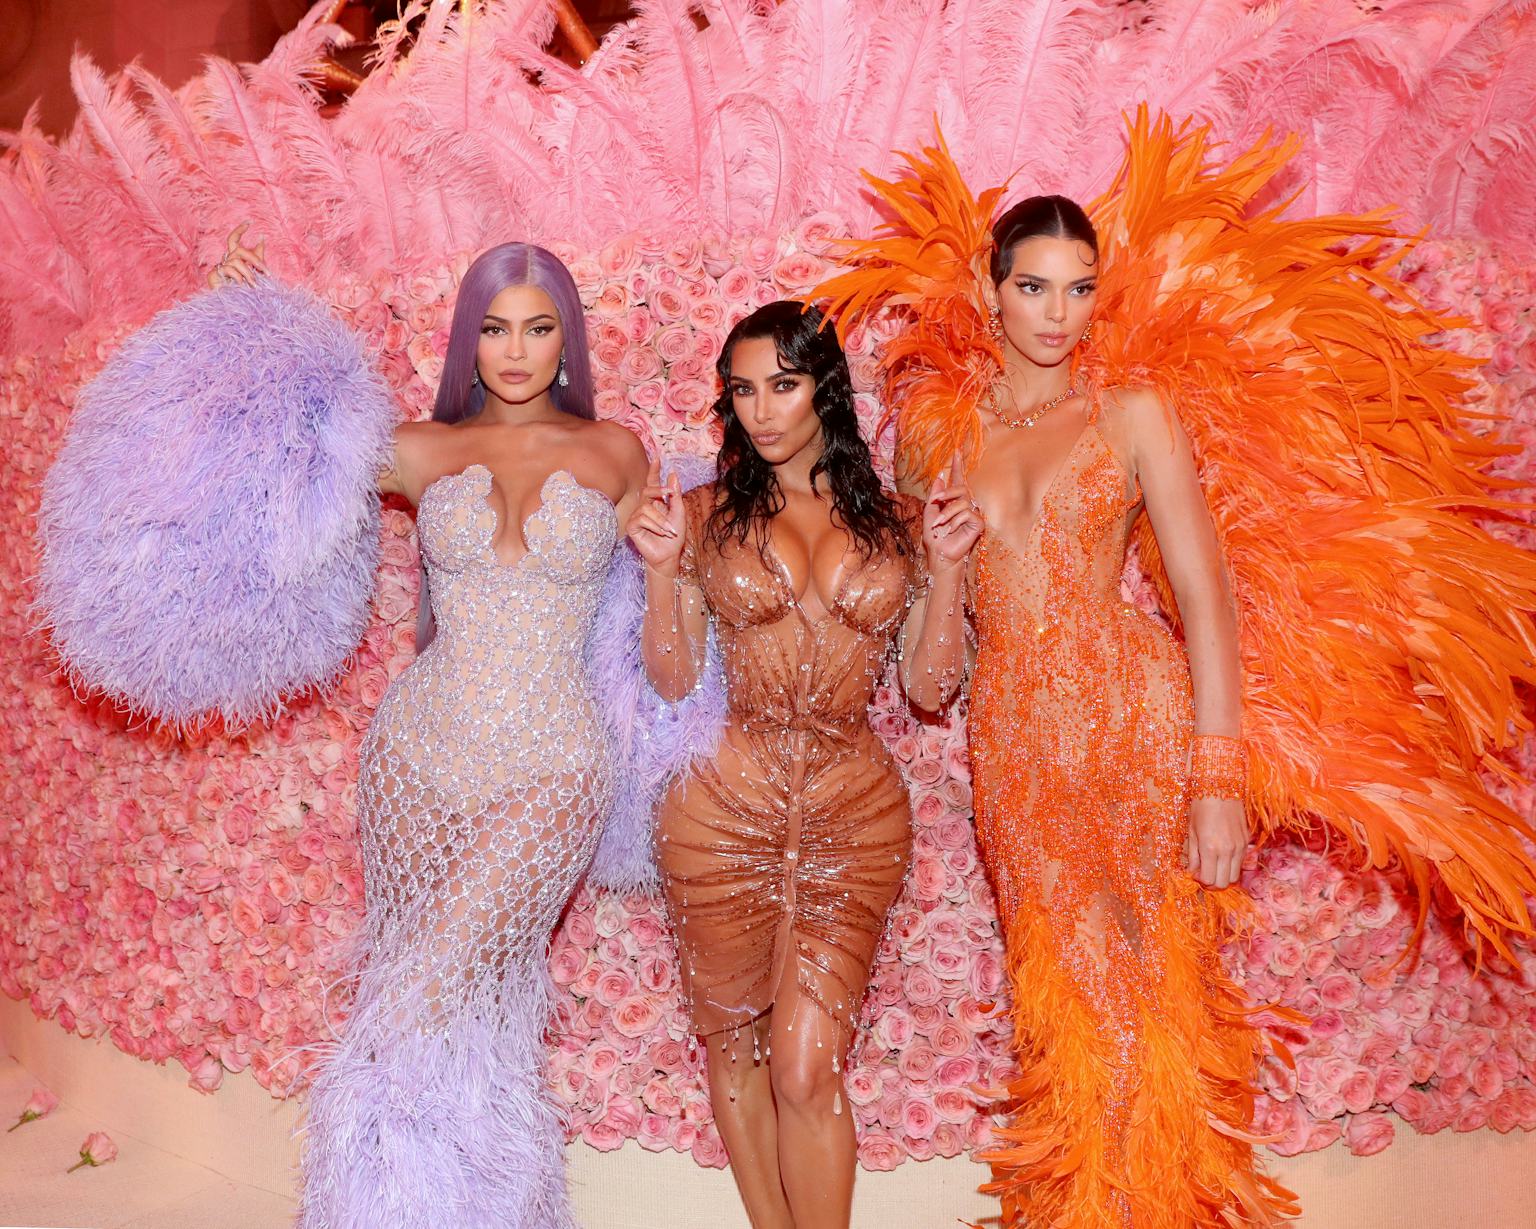 How Much Do Met Gala Tickets Cost? Here's What To Know